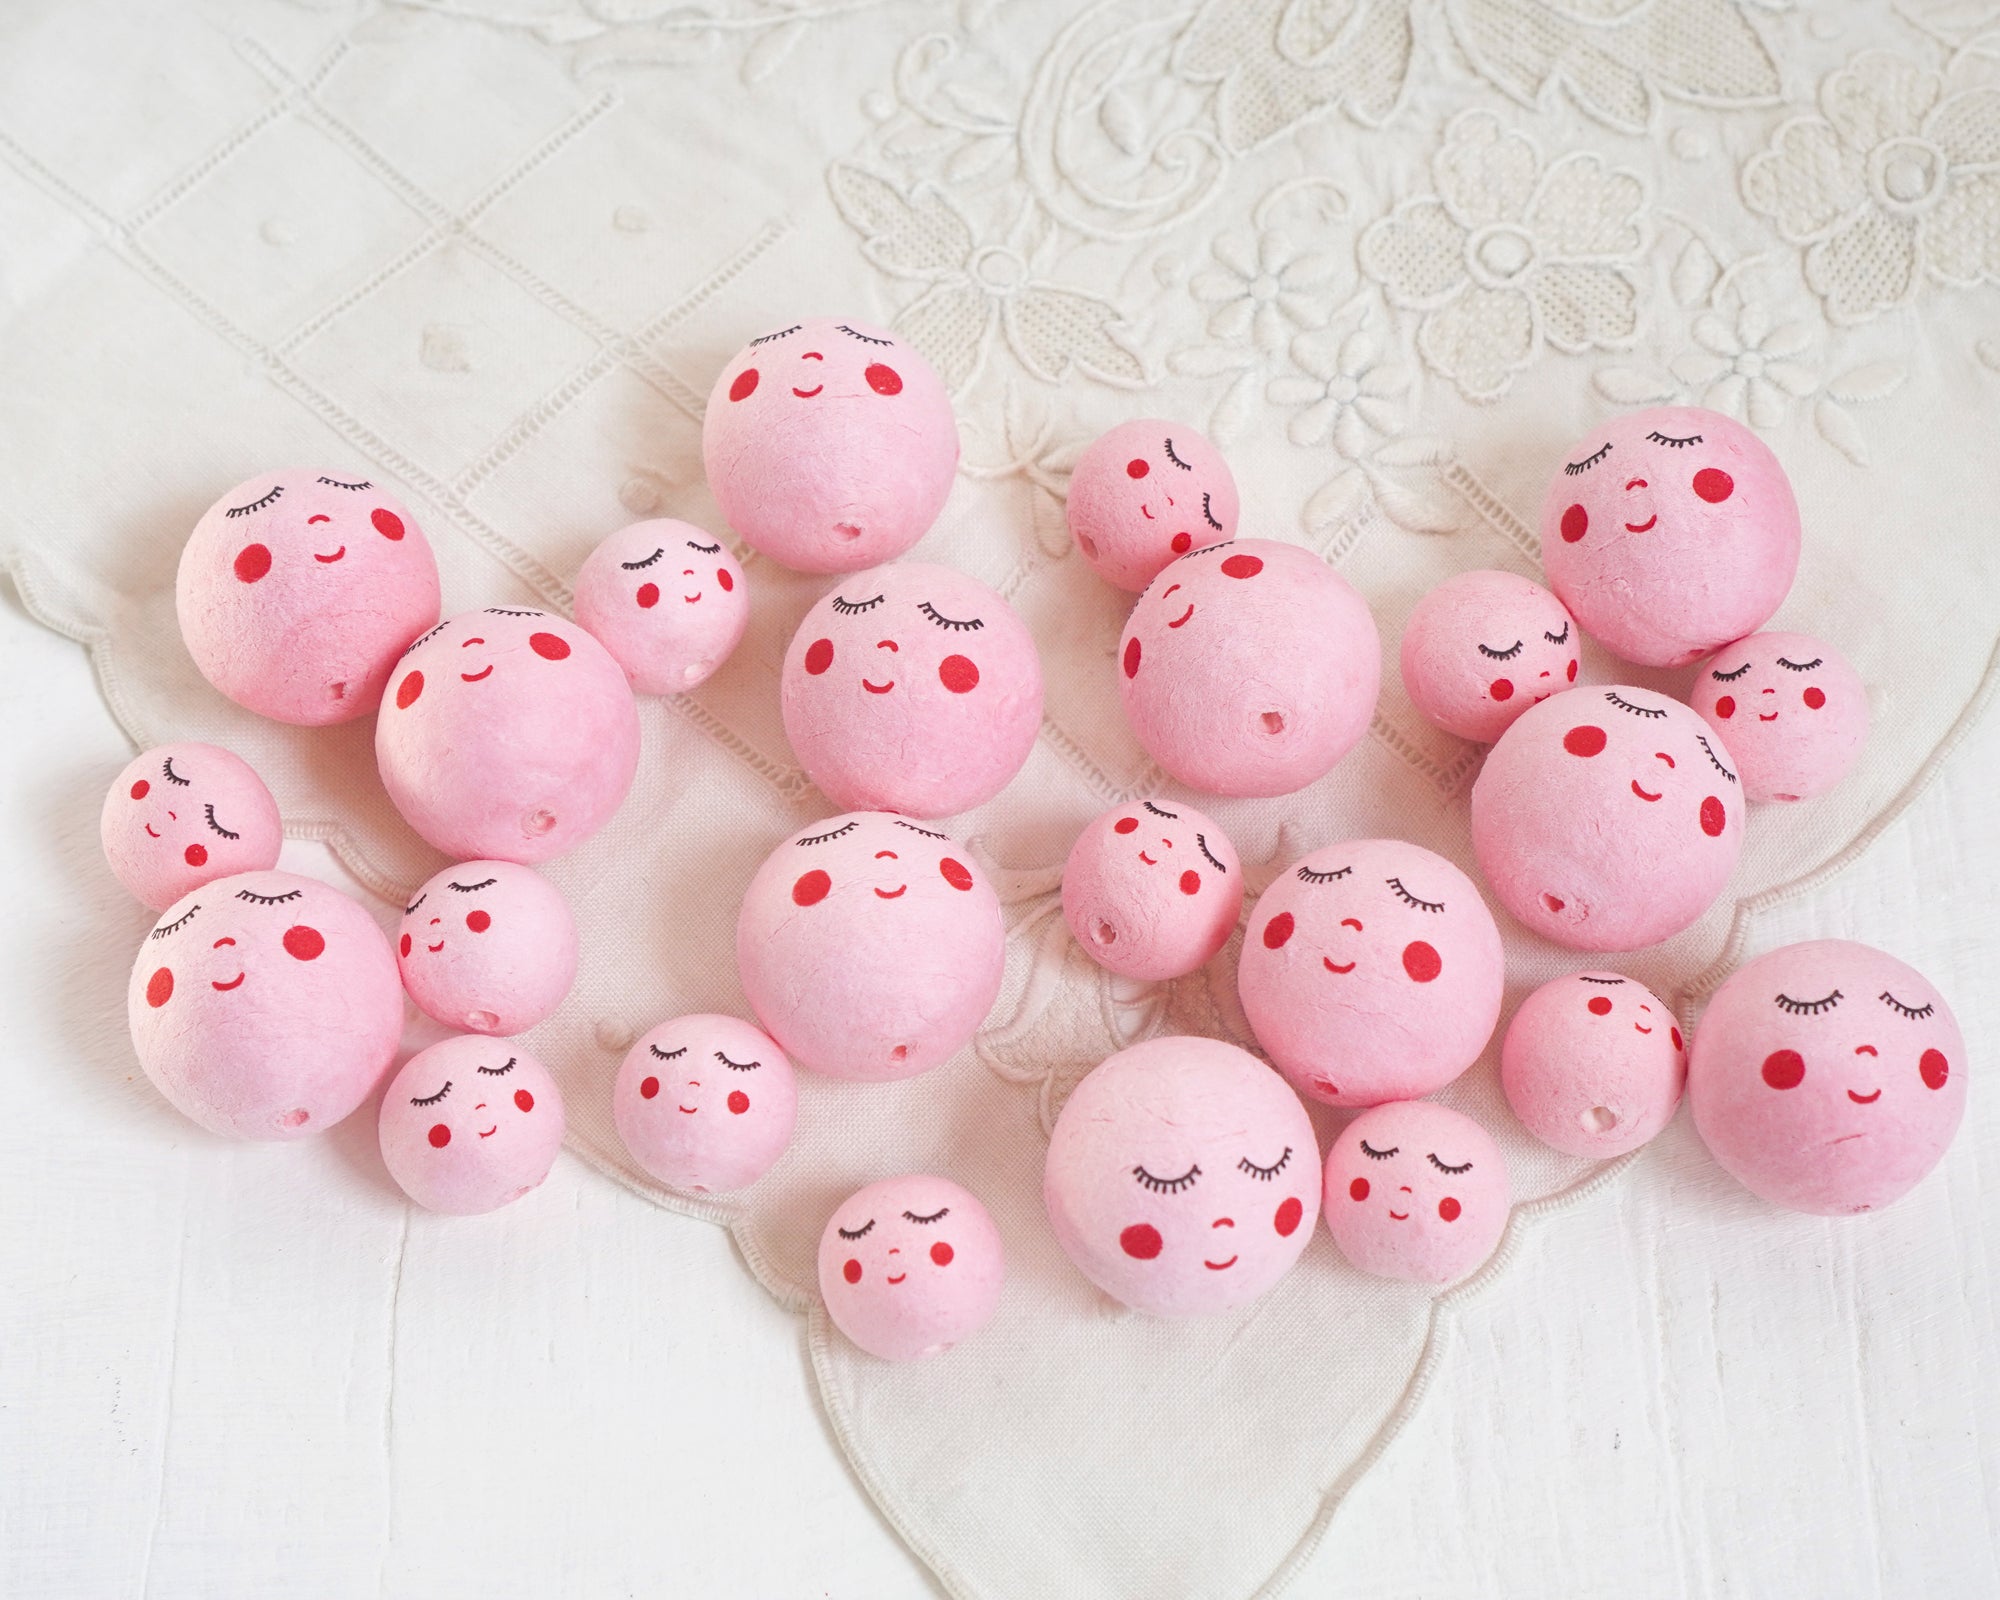 Pink Spun Cotton Heads: SWEET ANGEL - Vintage-Style Cotton Angel Heads with Faces